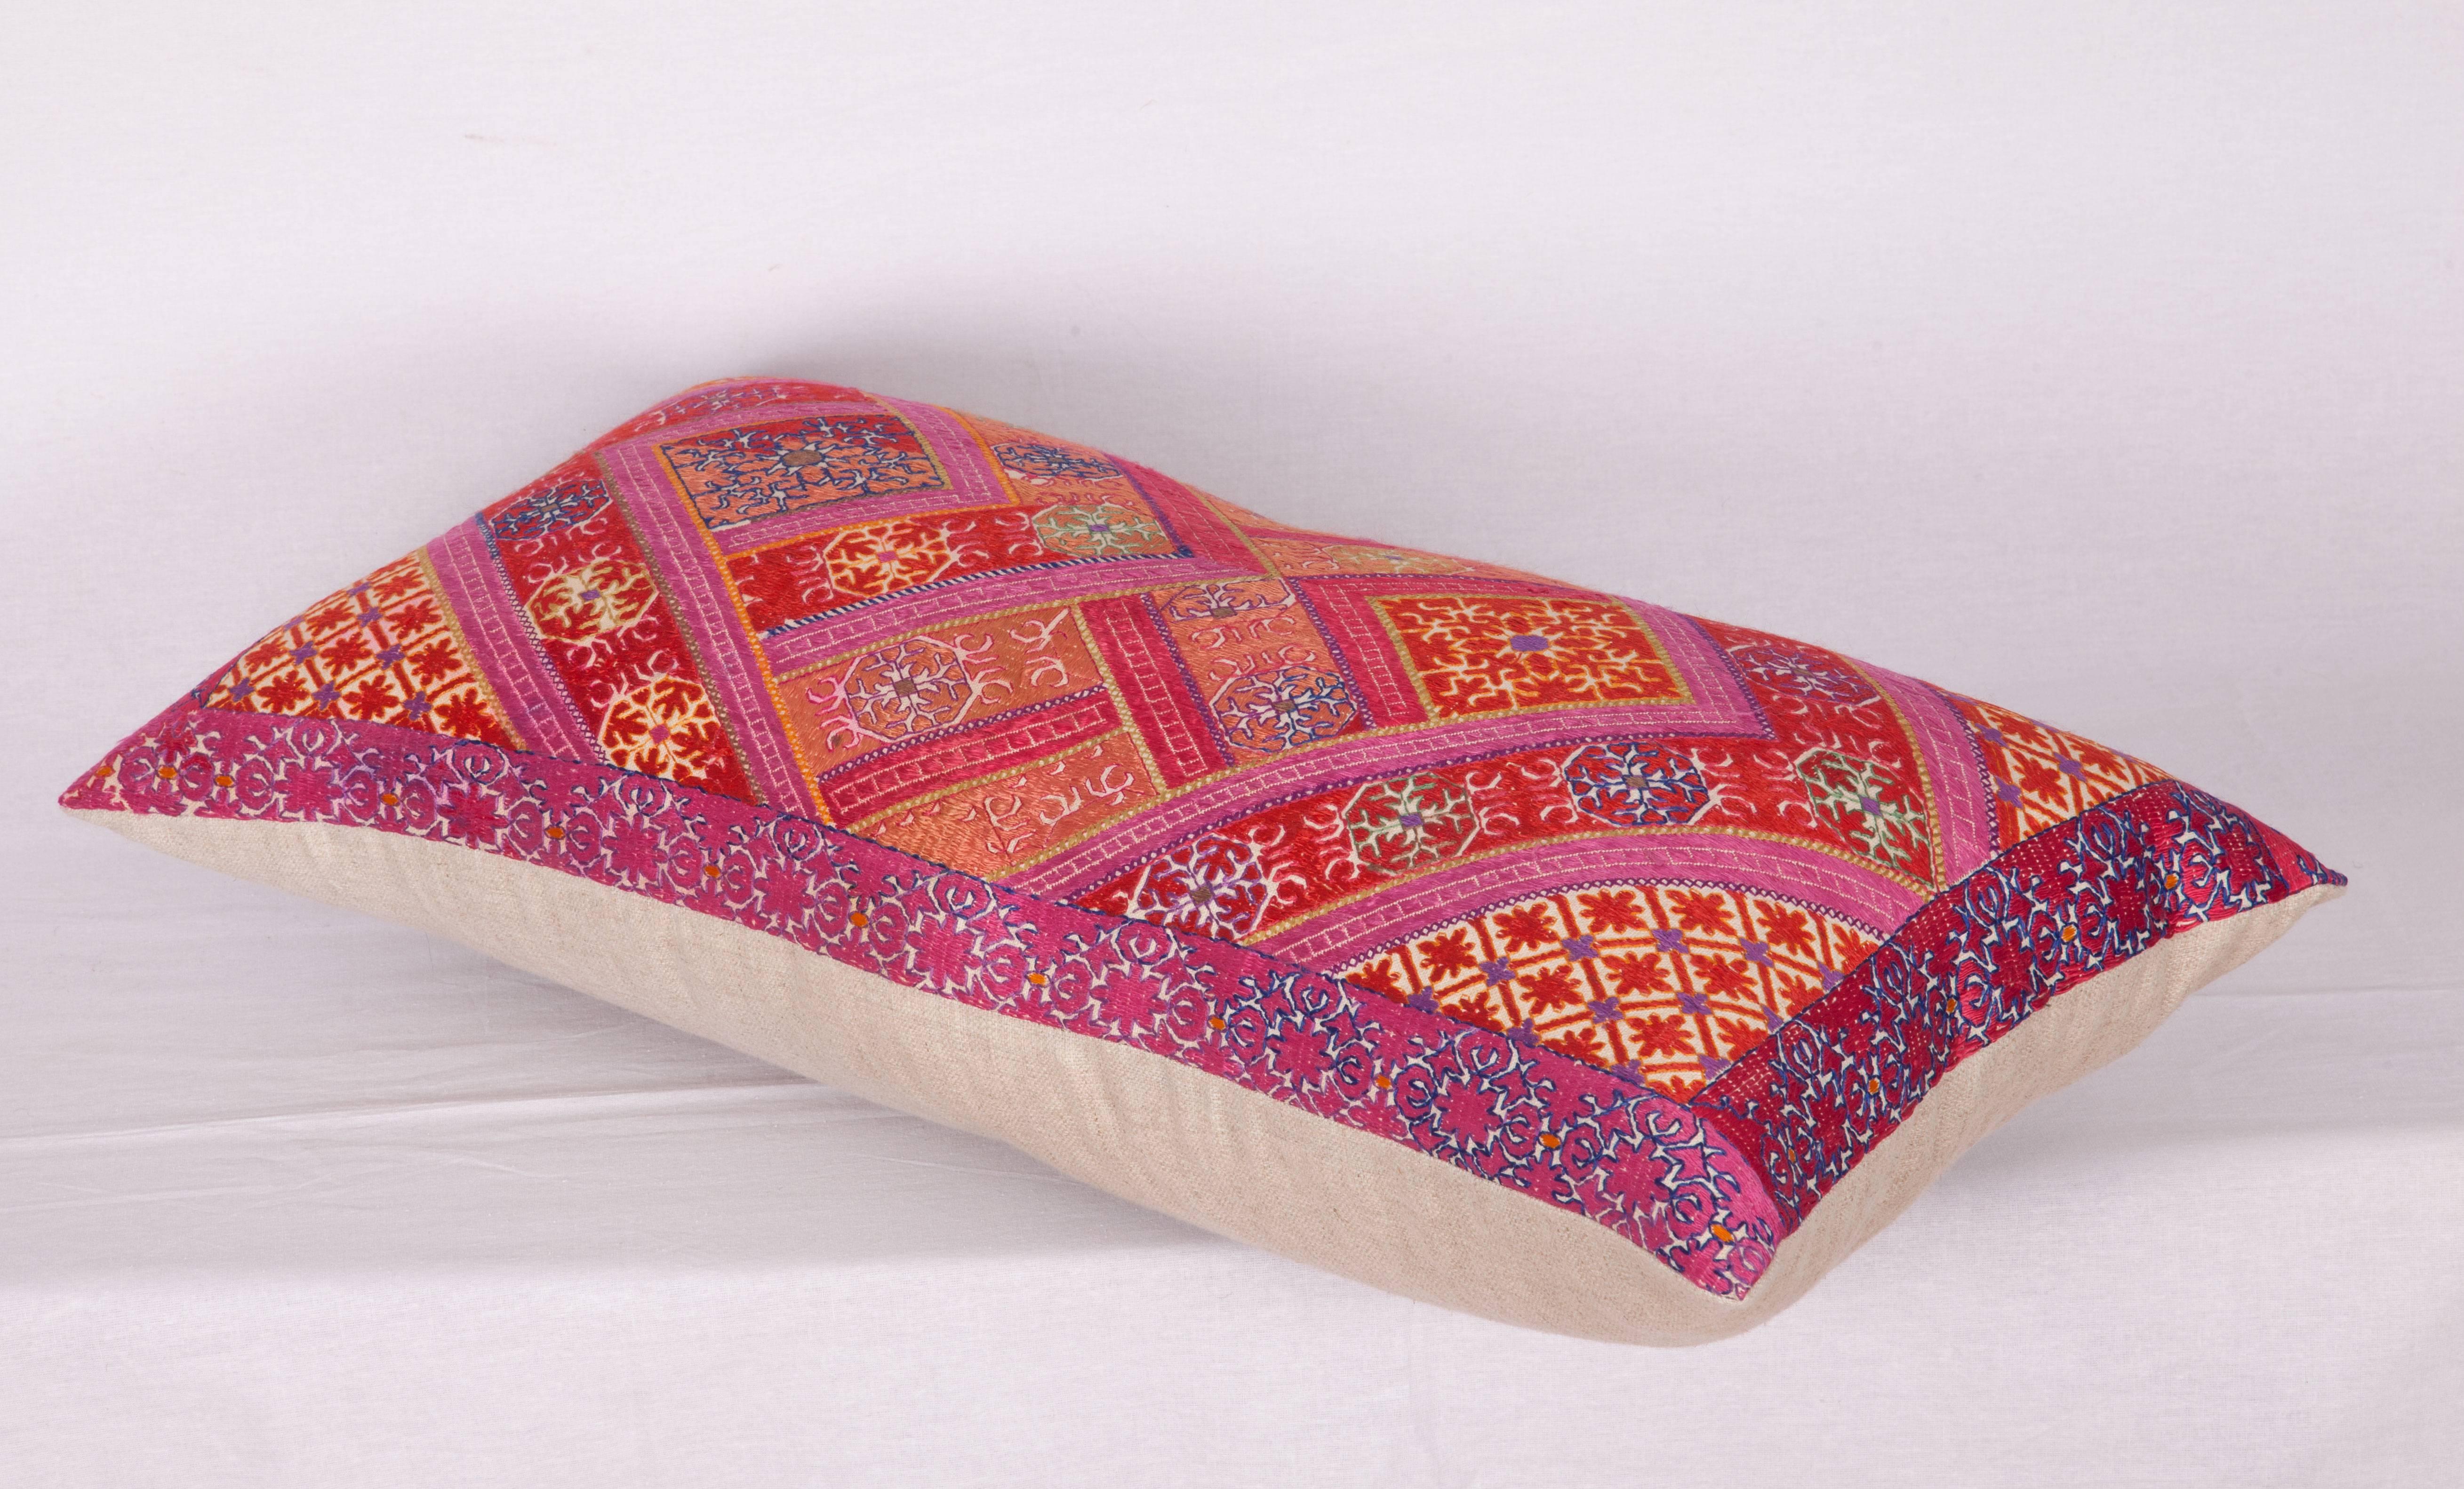 Cotton Pillow Made Out of a Mid-20th Century Swat Embroidery